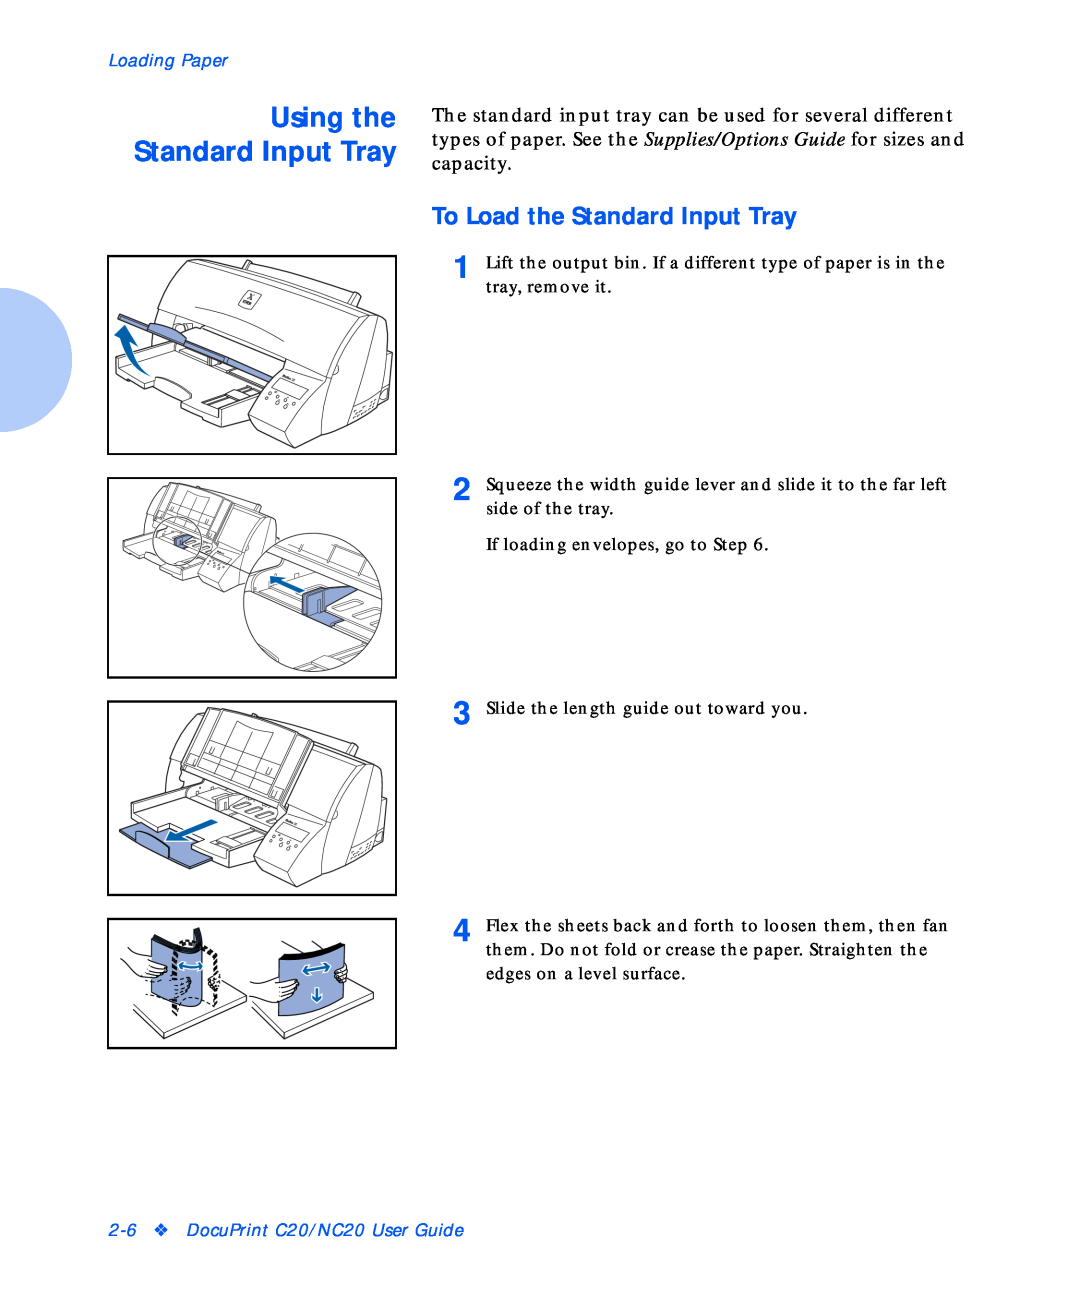 Xerox Using the Standard Input Tray, To Load the Standard Input Tray, Loading Paper, DocuPrint C20/NC20 User Guide 